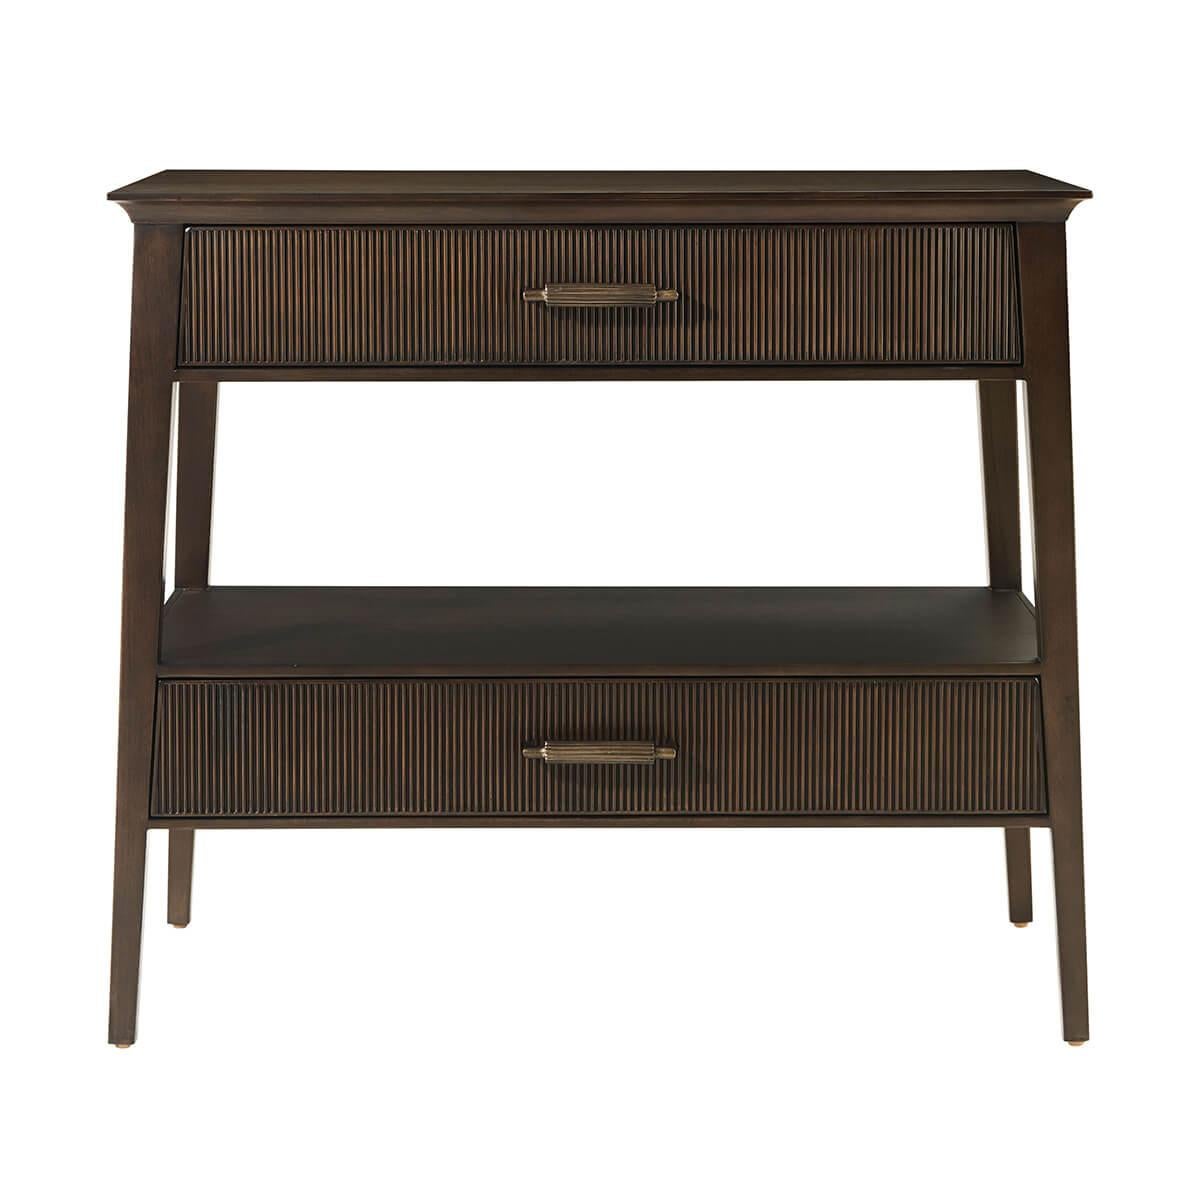 crafted from Prima Vera in our Bistre finish, features a sophisticated tapered silhouette with two long reeded drawers for storage. The custom forged hardware, finished in a dark rubbed bronze, echoes the reeded details throughout.

Dimensions: 32